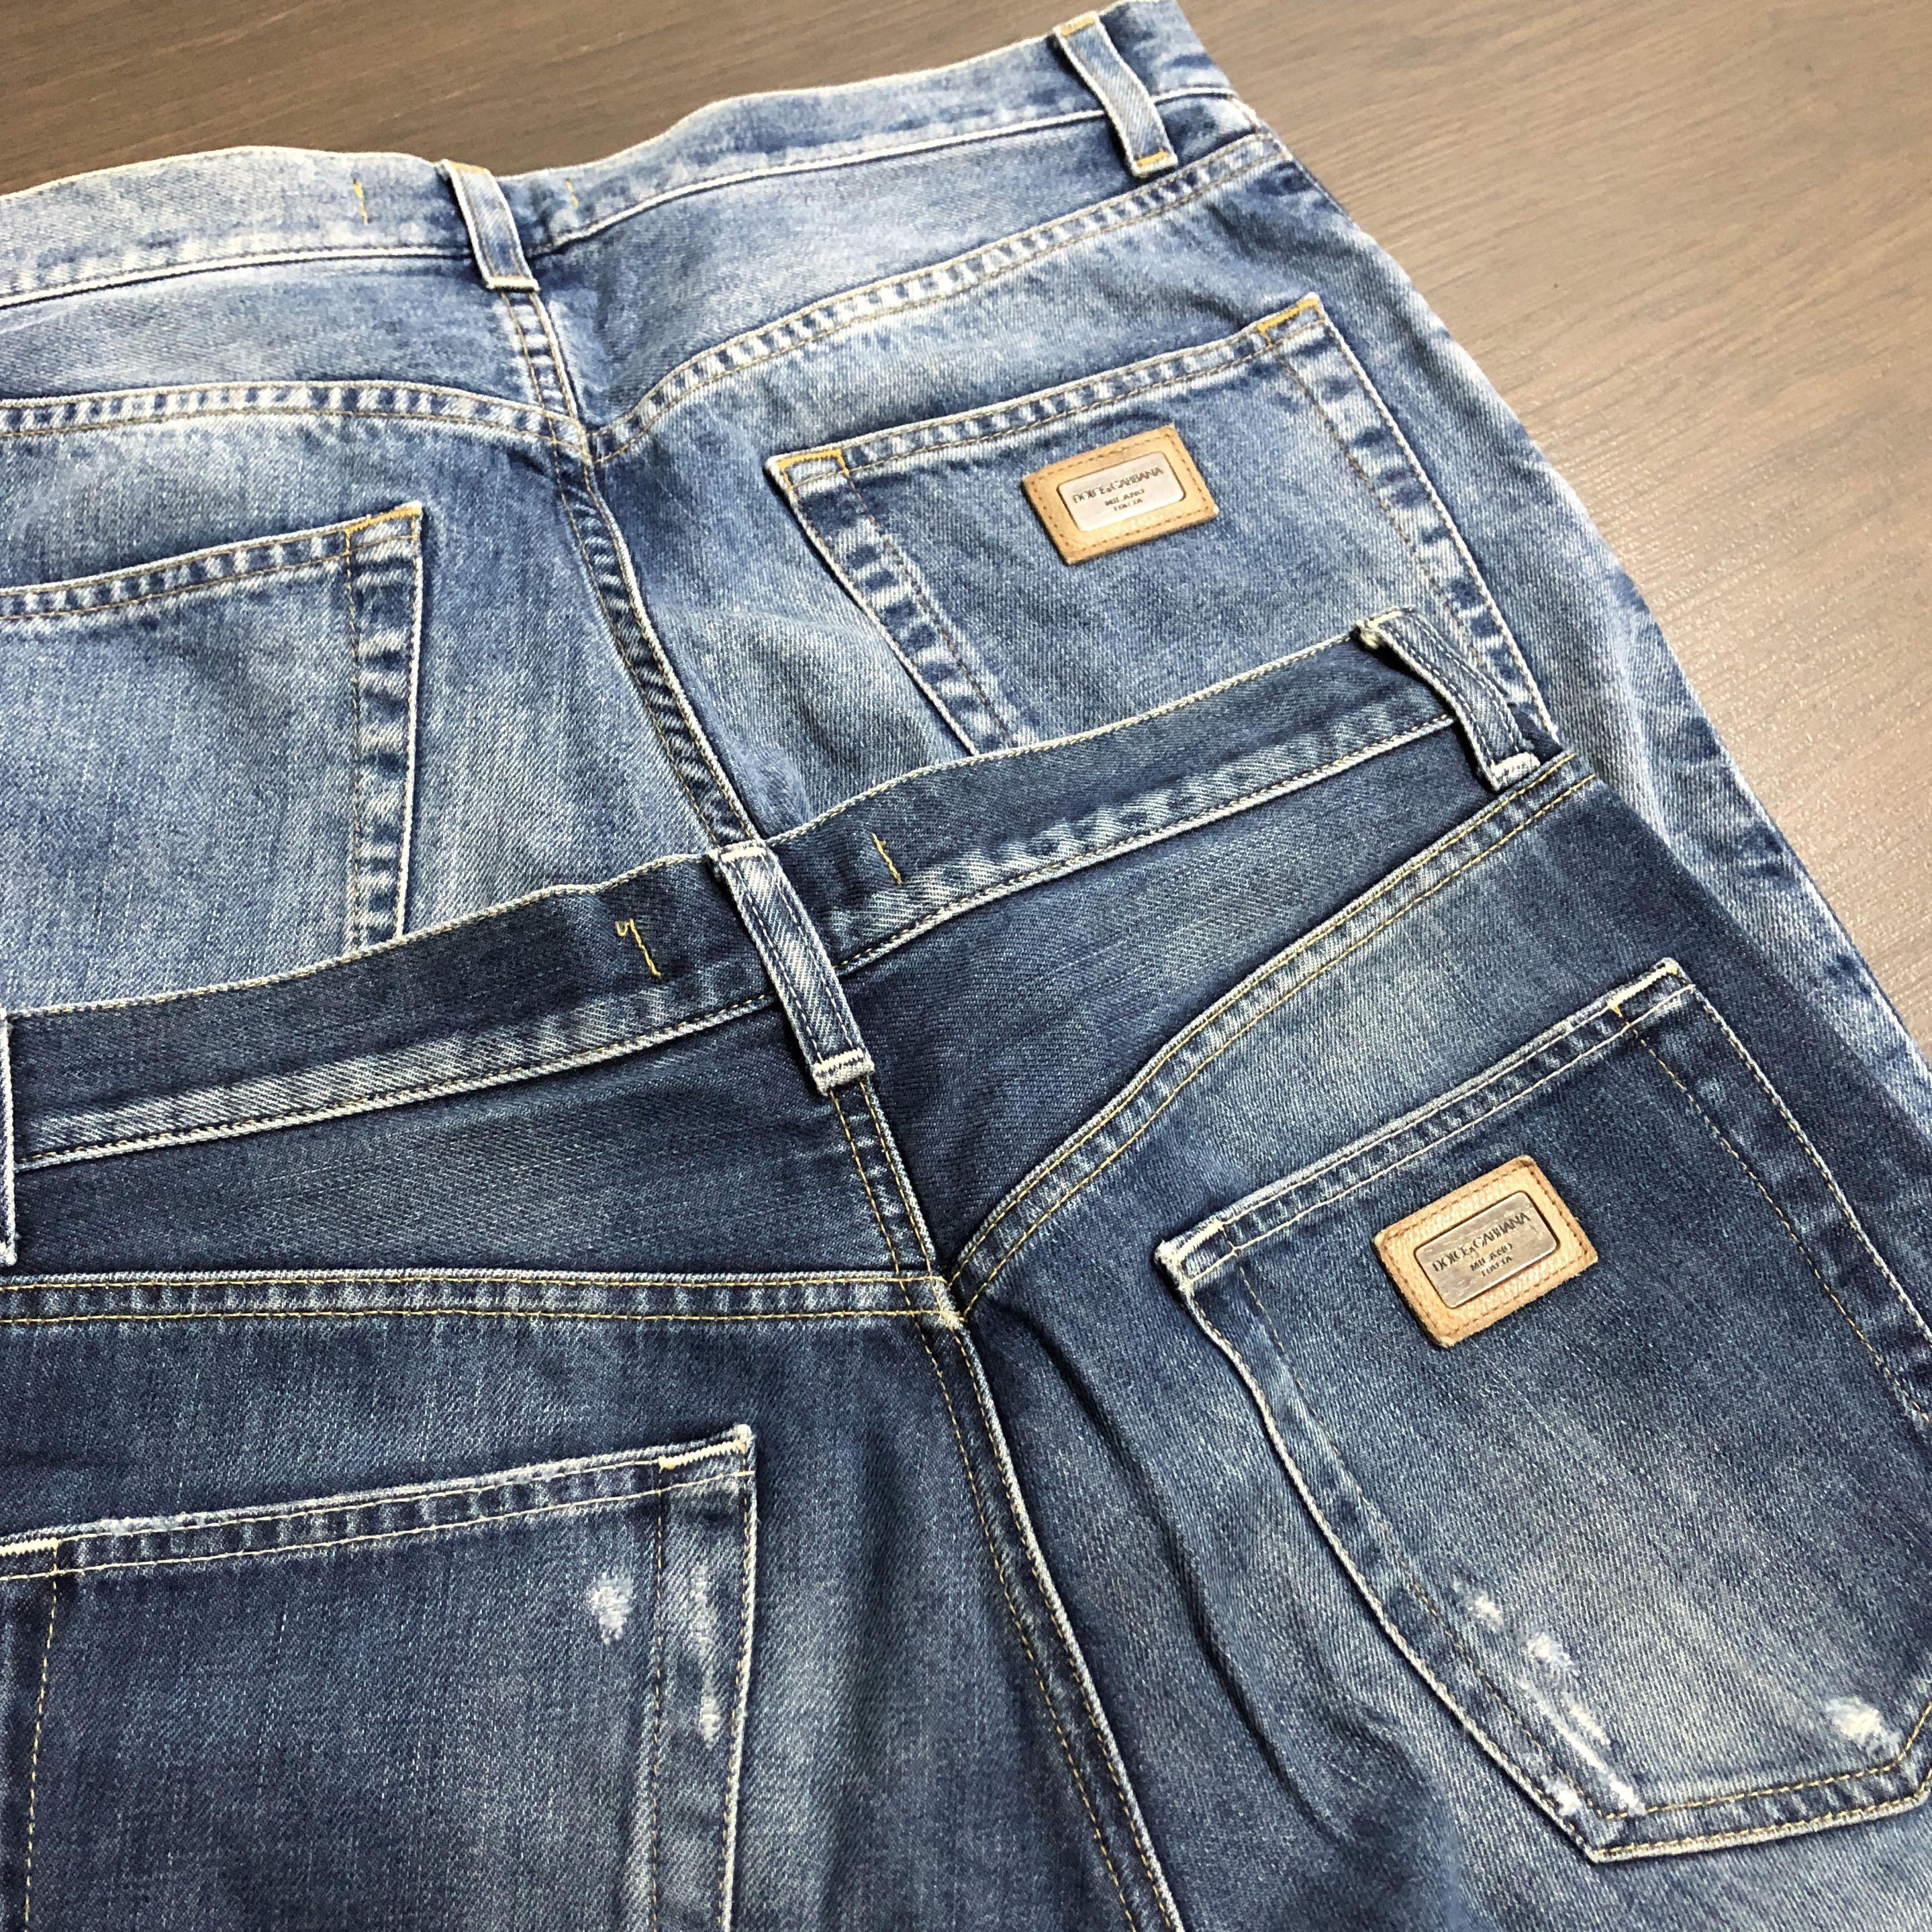 Dolce Gabbana made in italy denim jeans size 44, Men's Fashion, Bottoms,  Jeans on Carousell